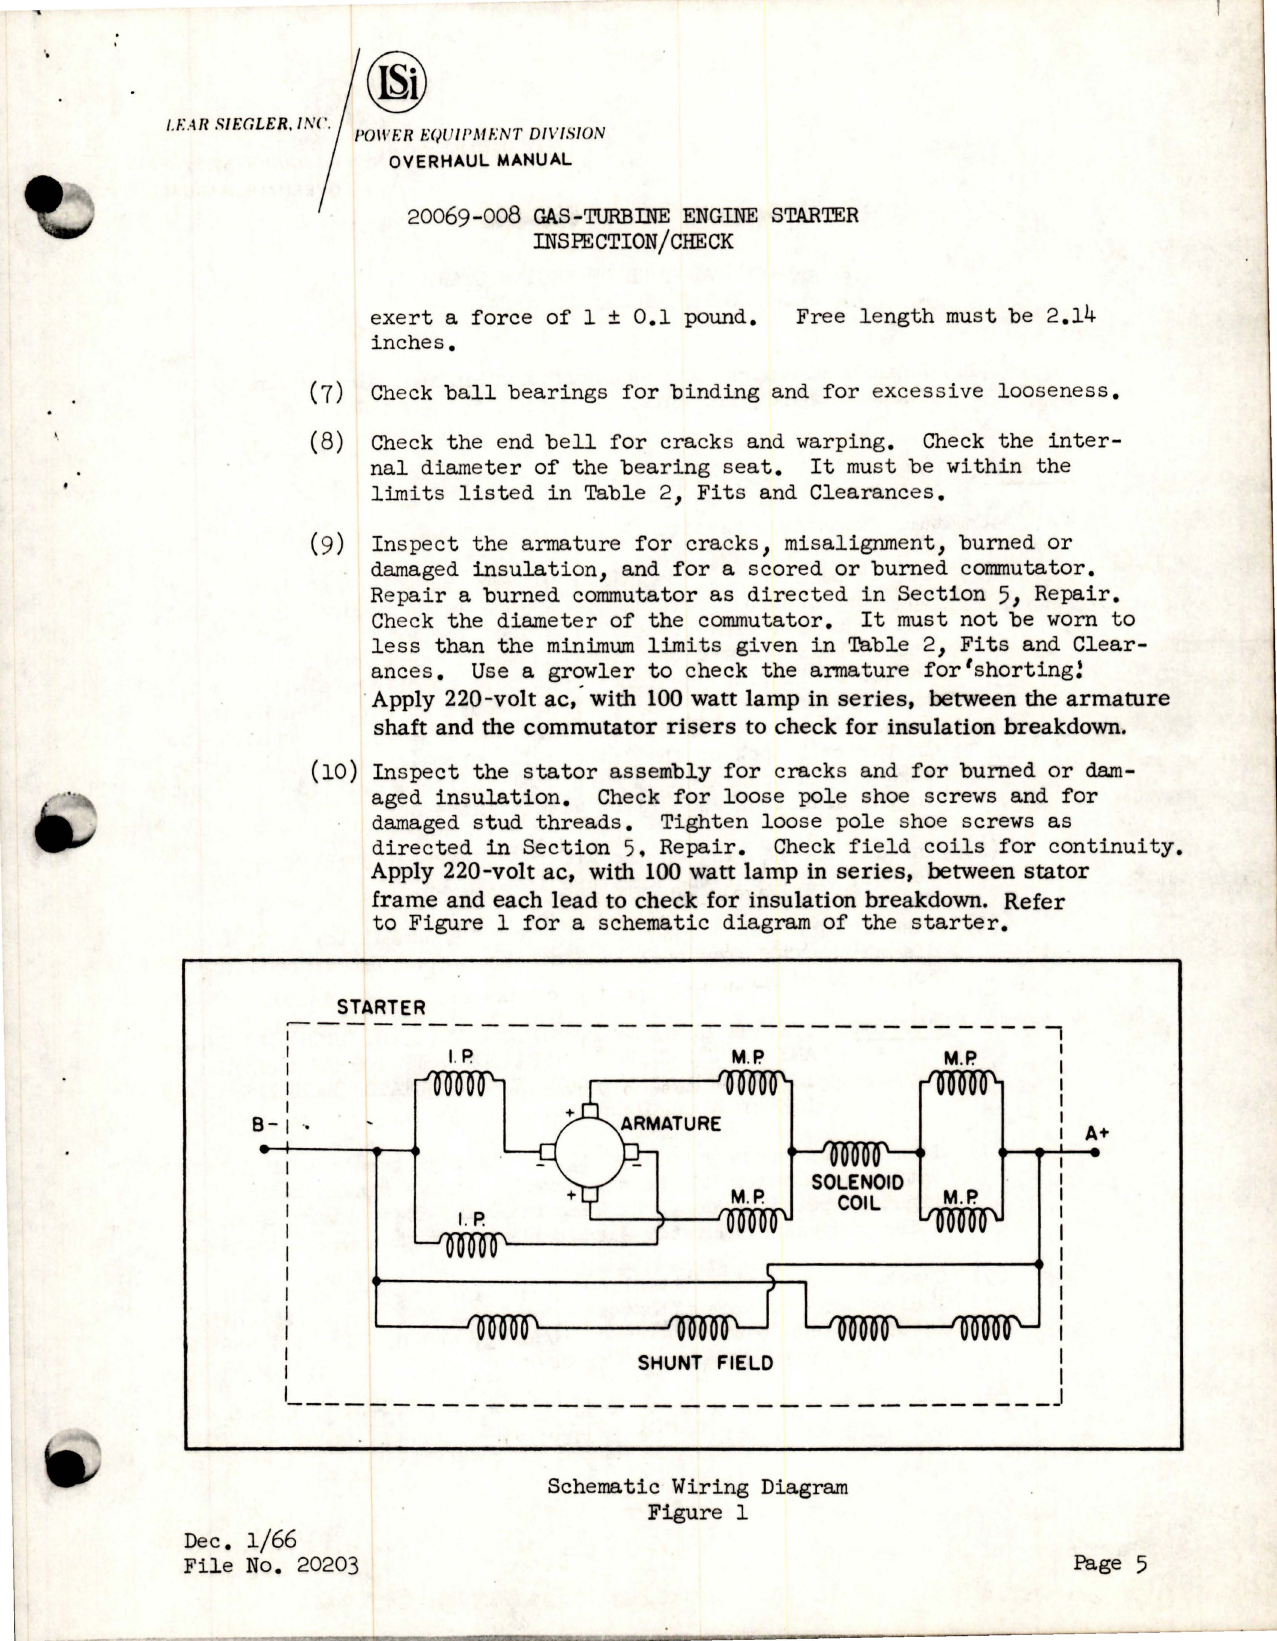 Sample page 9 from AirCorps Library document: Overhaul Instructions with Parts Breakdown for Gas-Turbine Engine Starter - Models 20069-005, 20069-008 